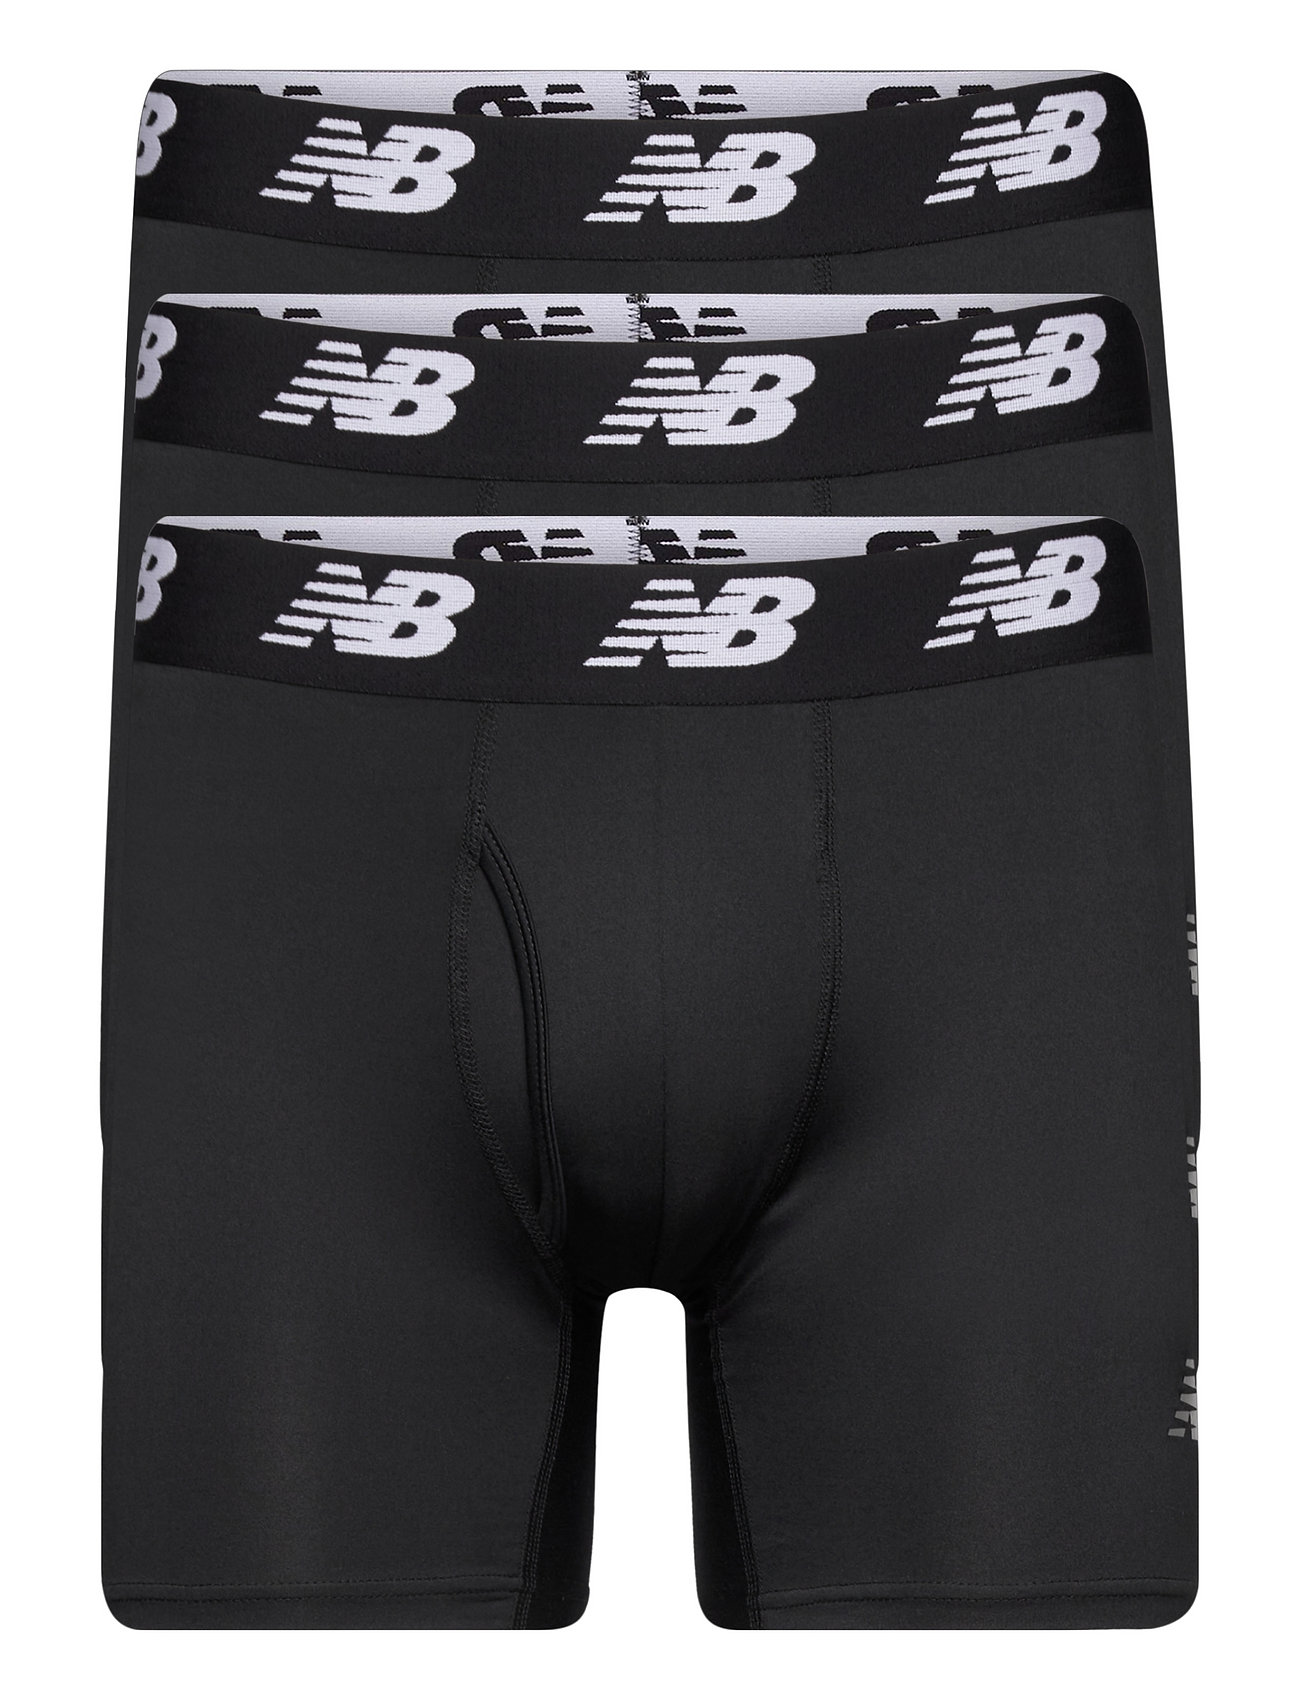 Mens Premium 6" Boxer Brief With Fly 3 Pack Sport Boxers Black New Balance